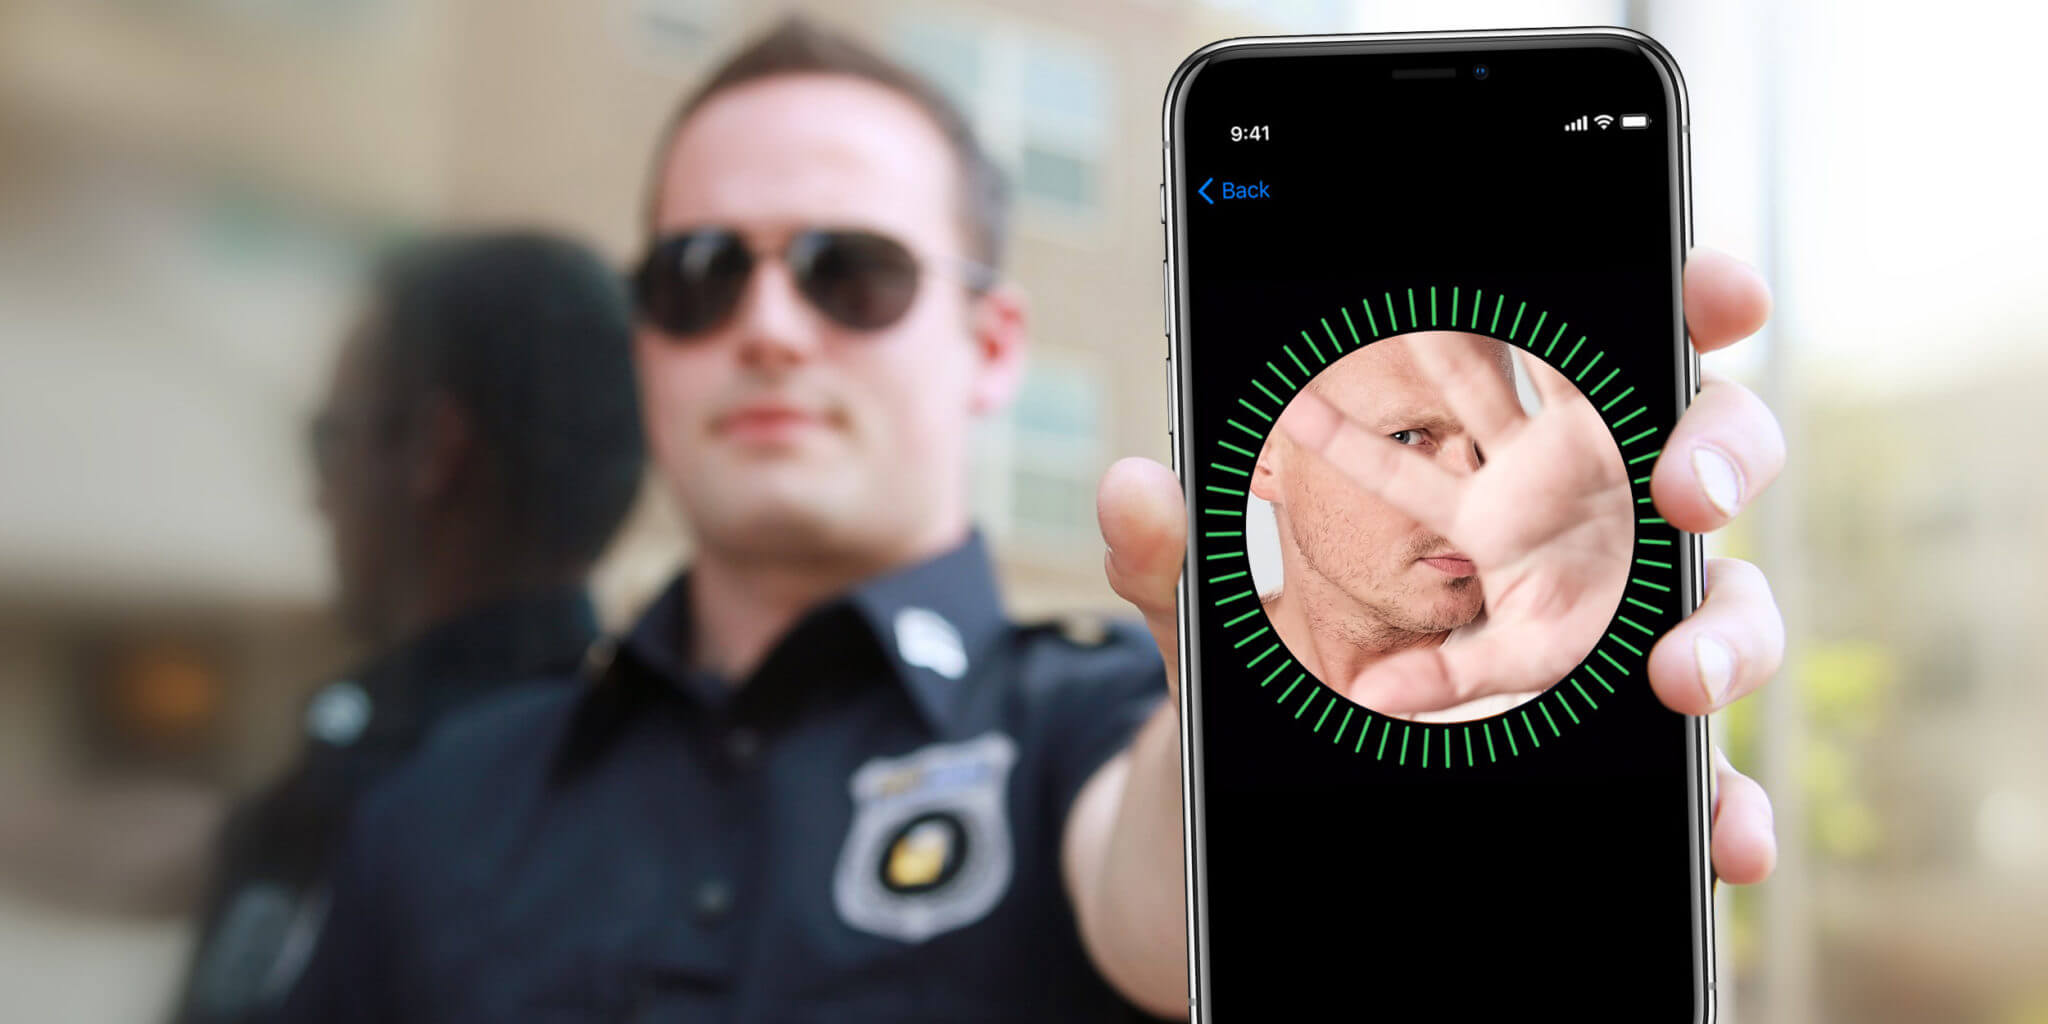 Judge rules that no form of biometric security can be used to force a smartphone unlock